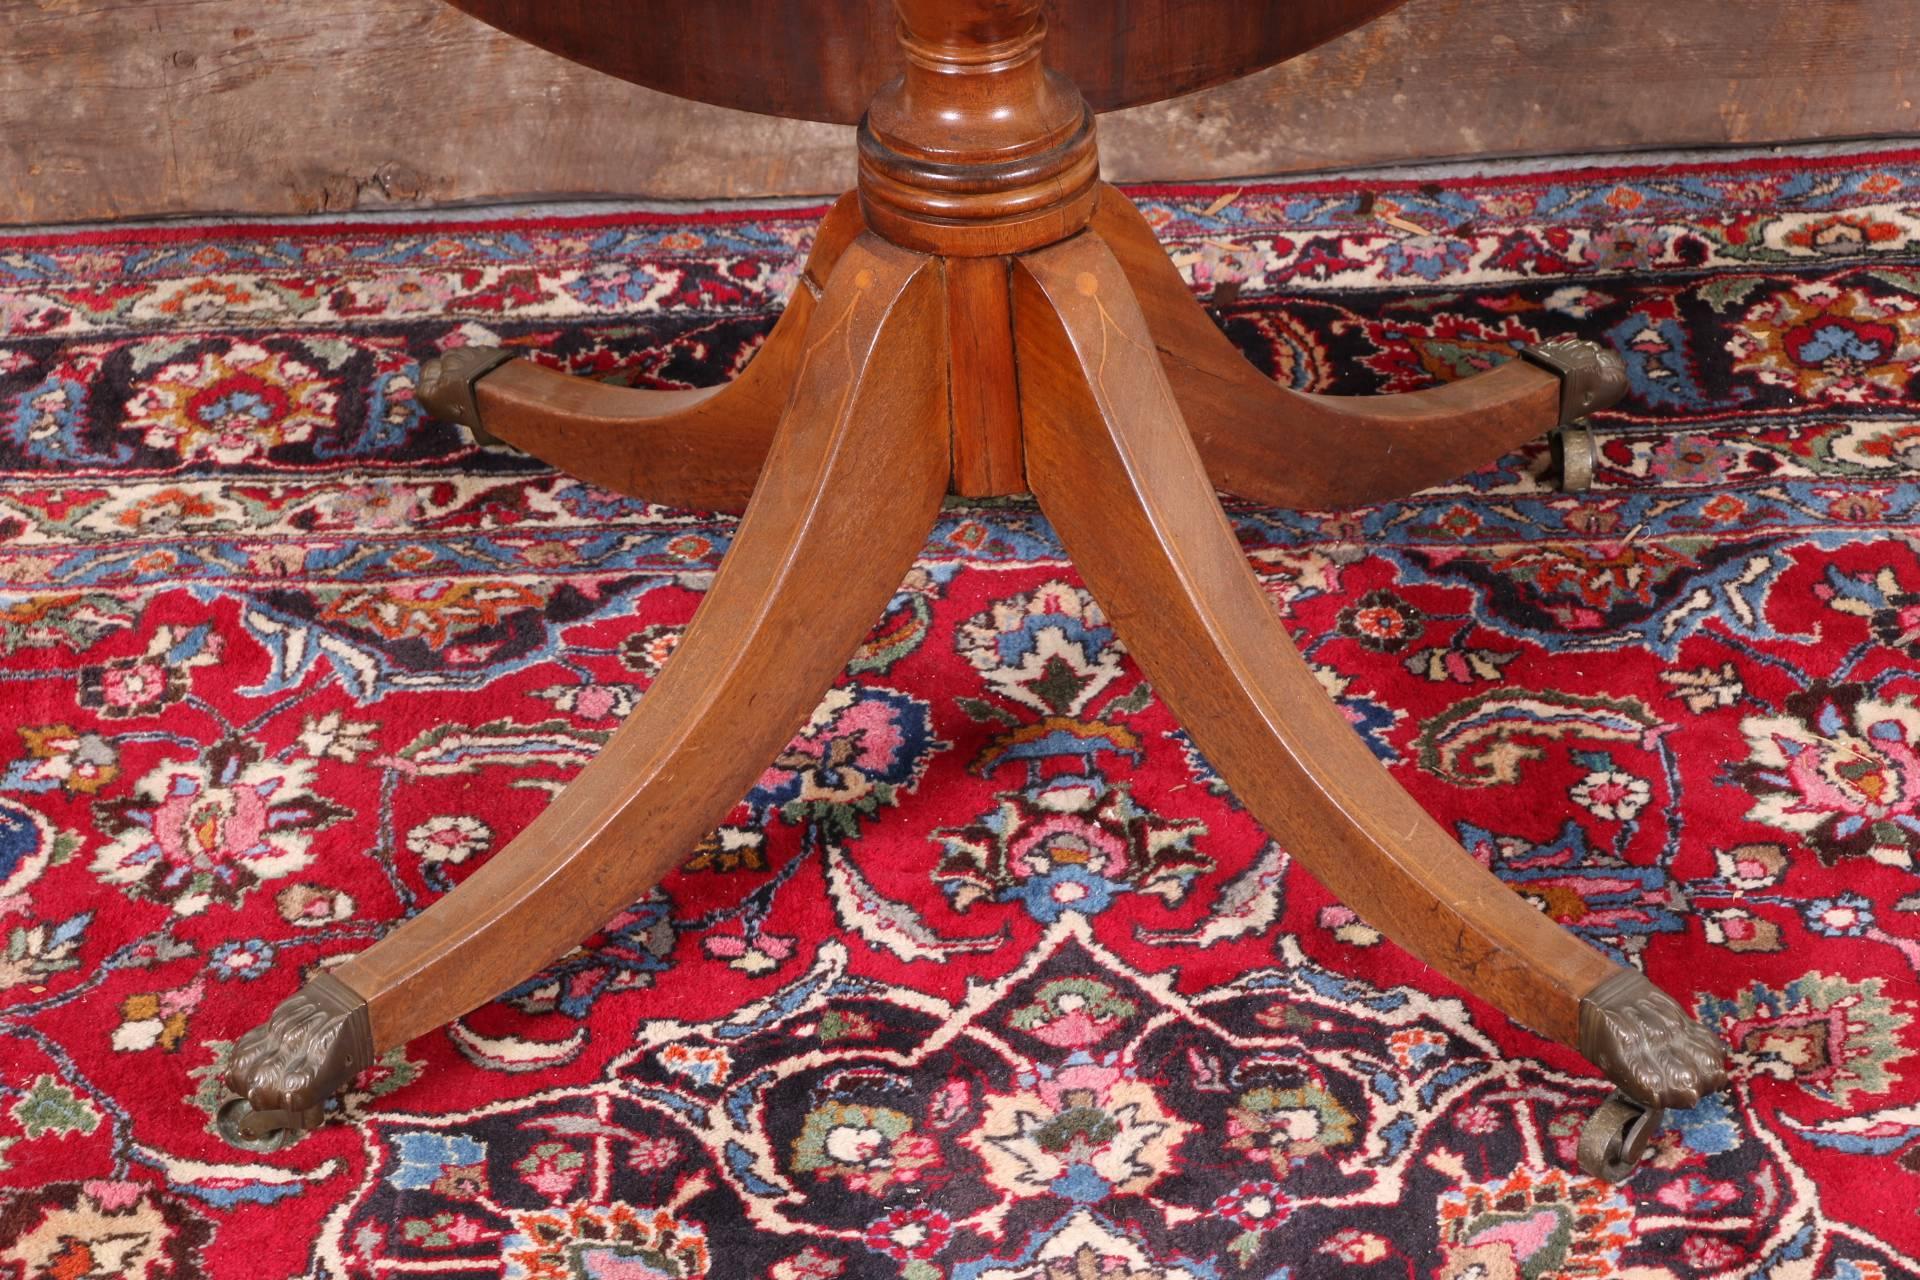 The oval top with inlaid burled cross-banding, and a baluster support on four splayed legs ending in brass lion's paw feet and casters. 
Condition: water damage to inlaid cross-banding, some scratches and dings to the top